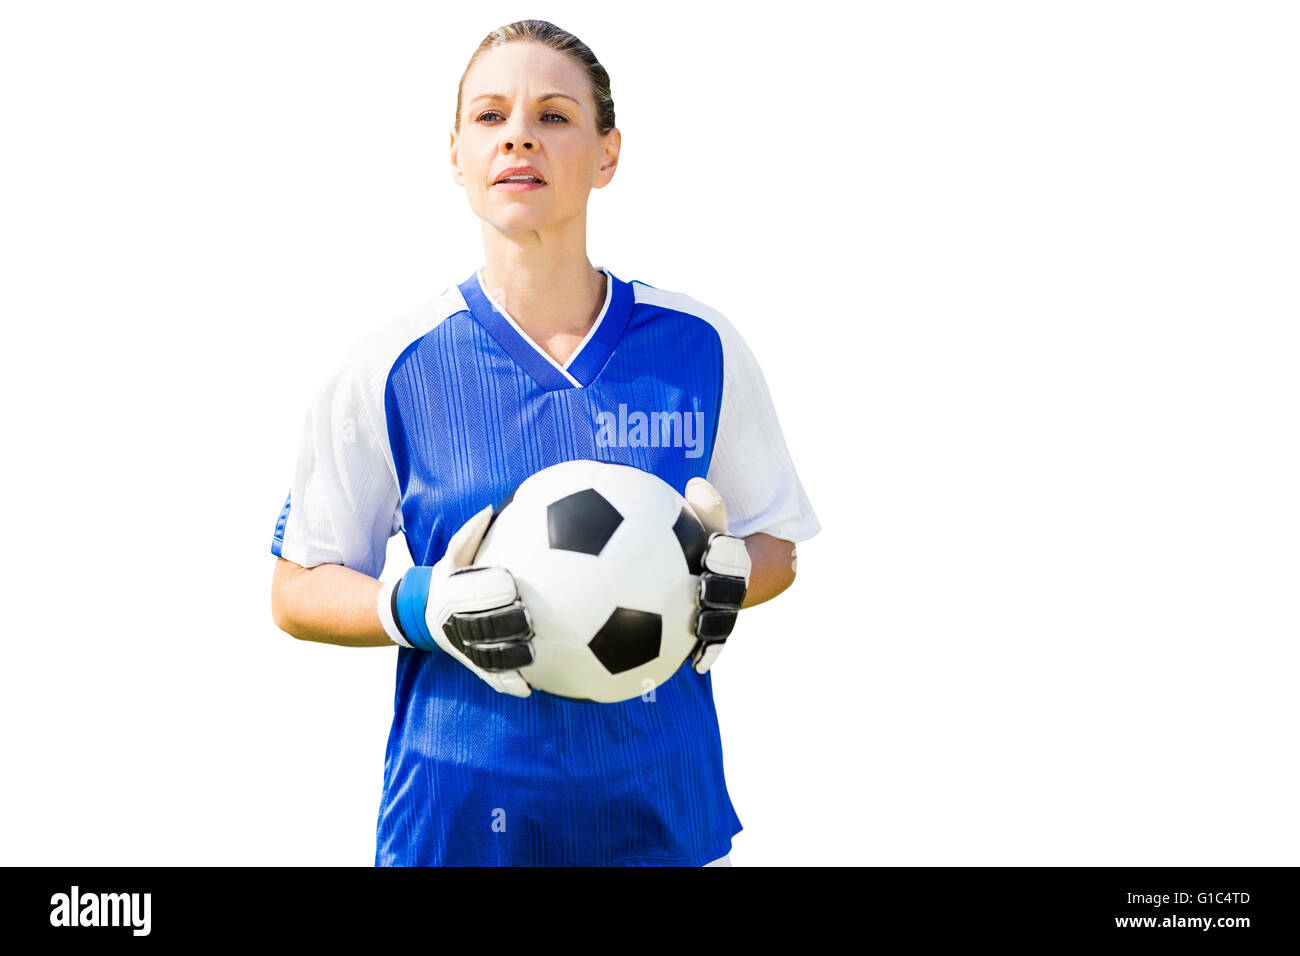 Woman goalkeeper posing with a ball Stock Photo